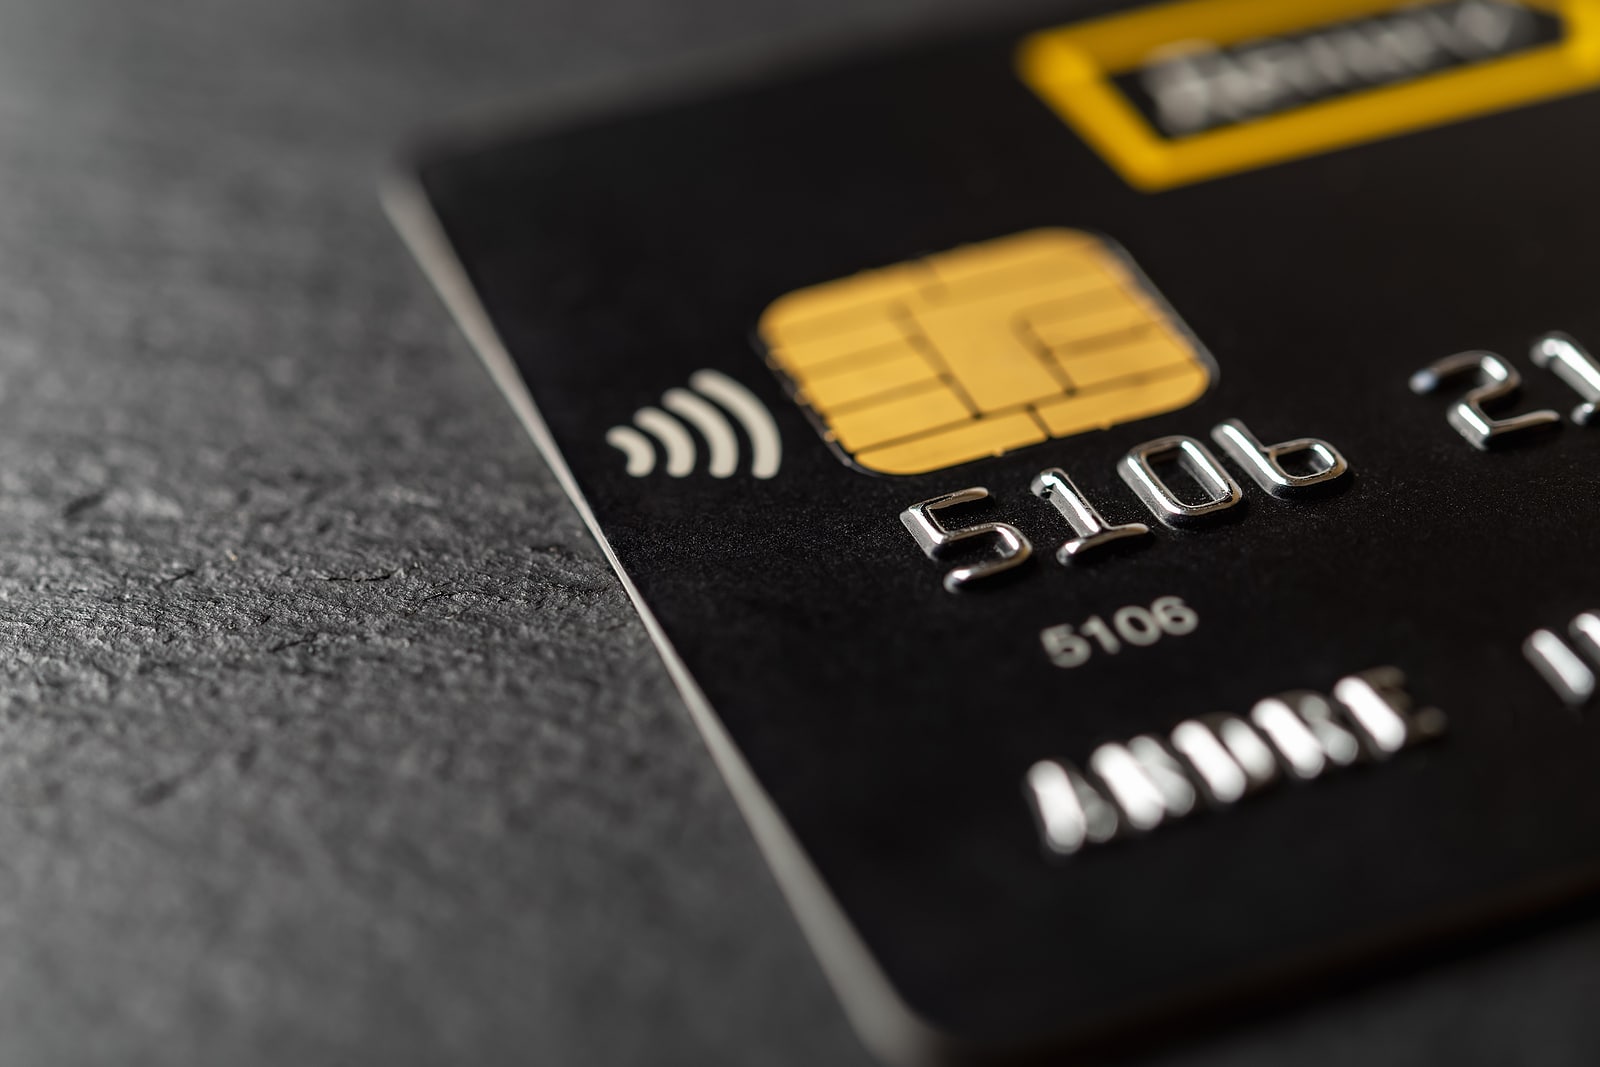 Debit card with contactless technology and chip